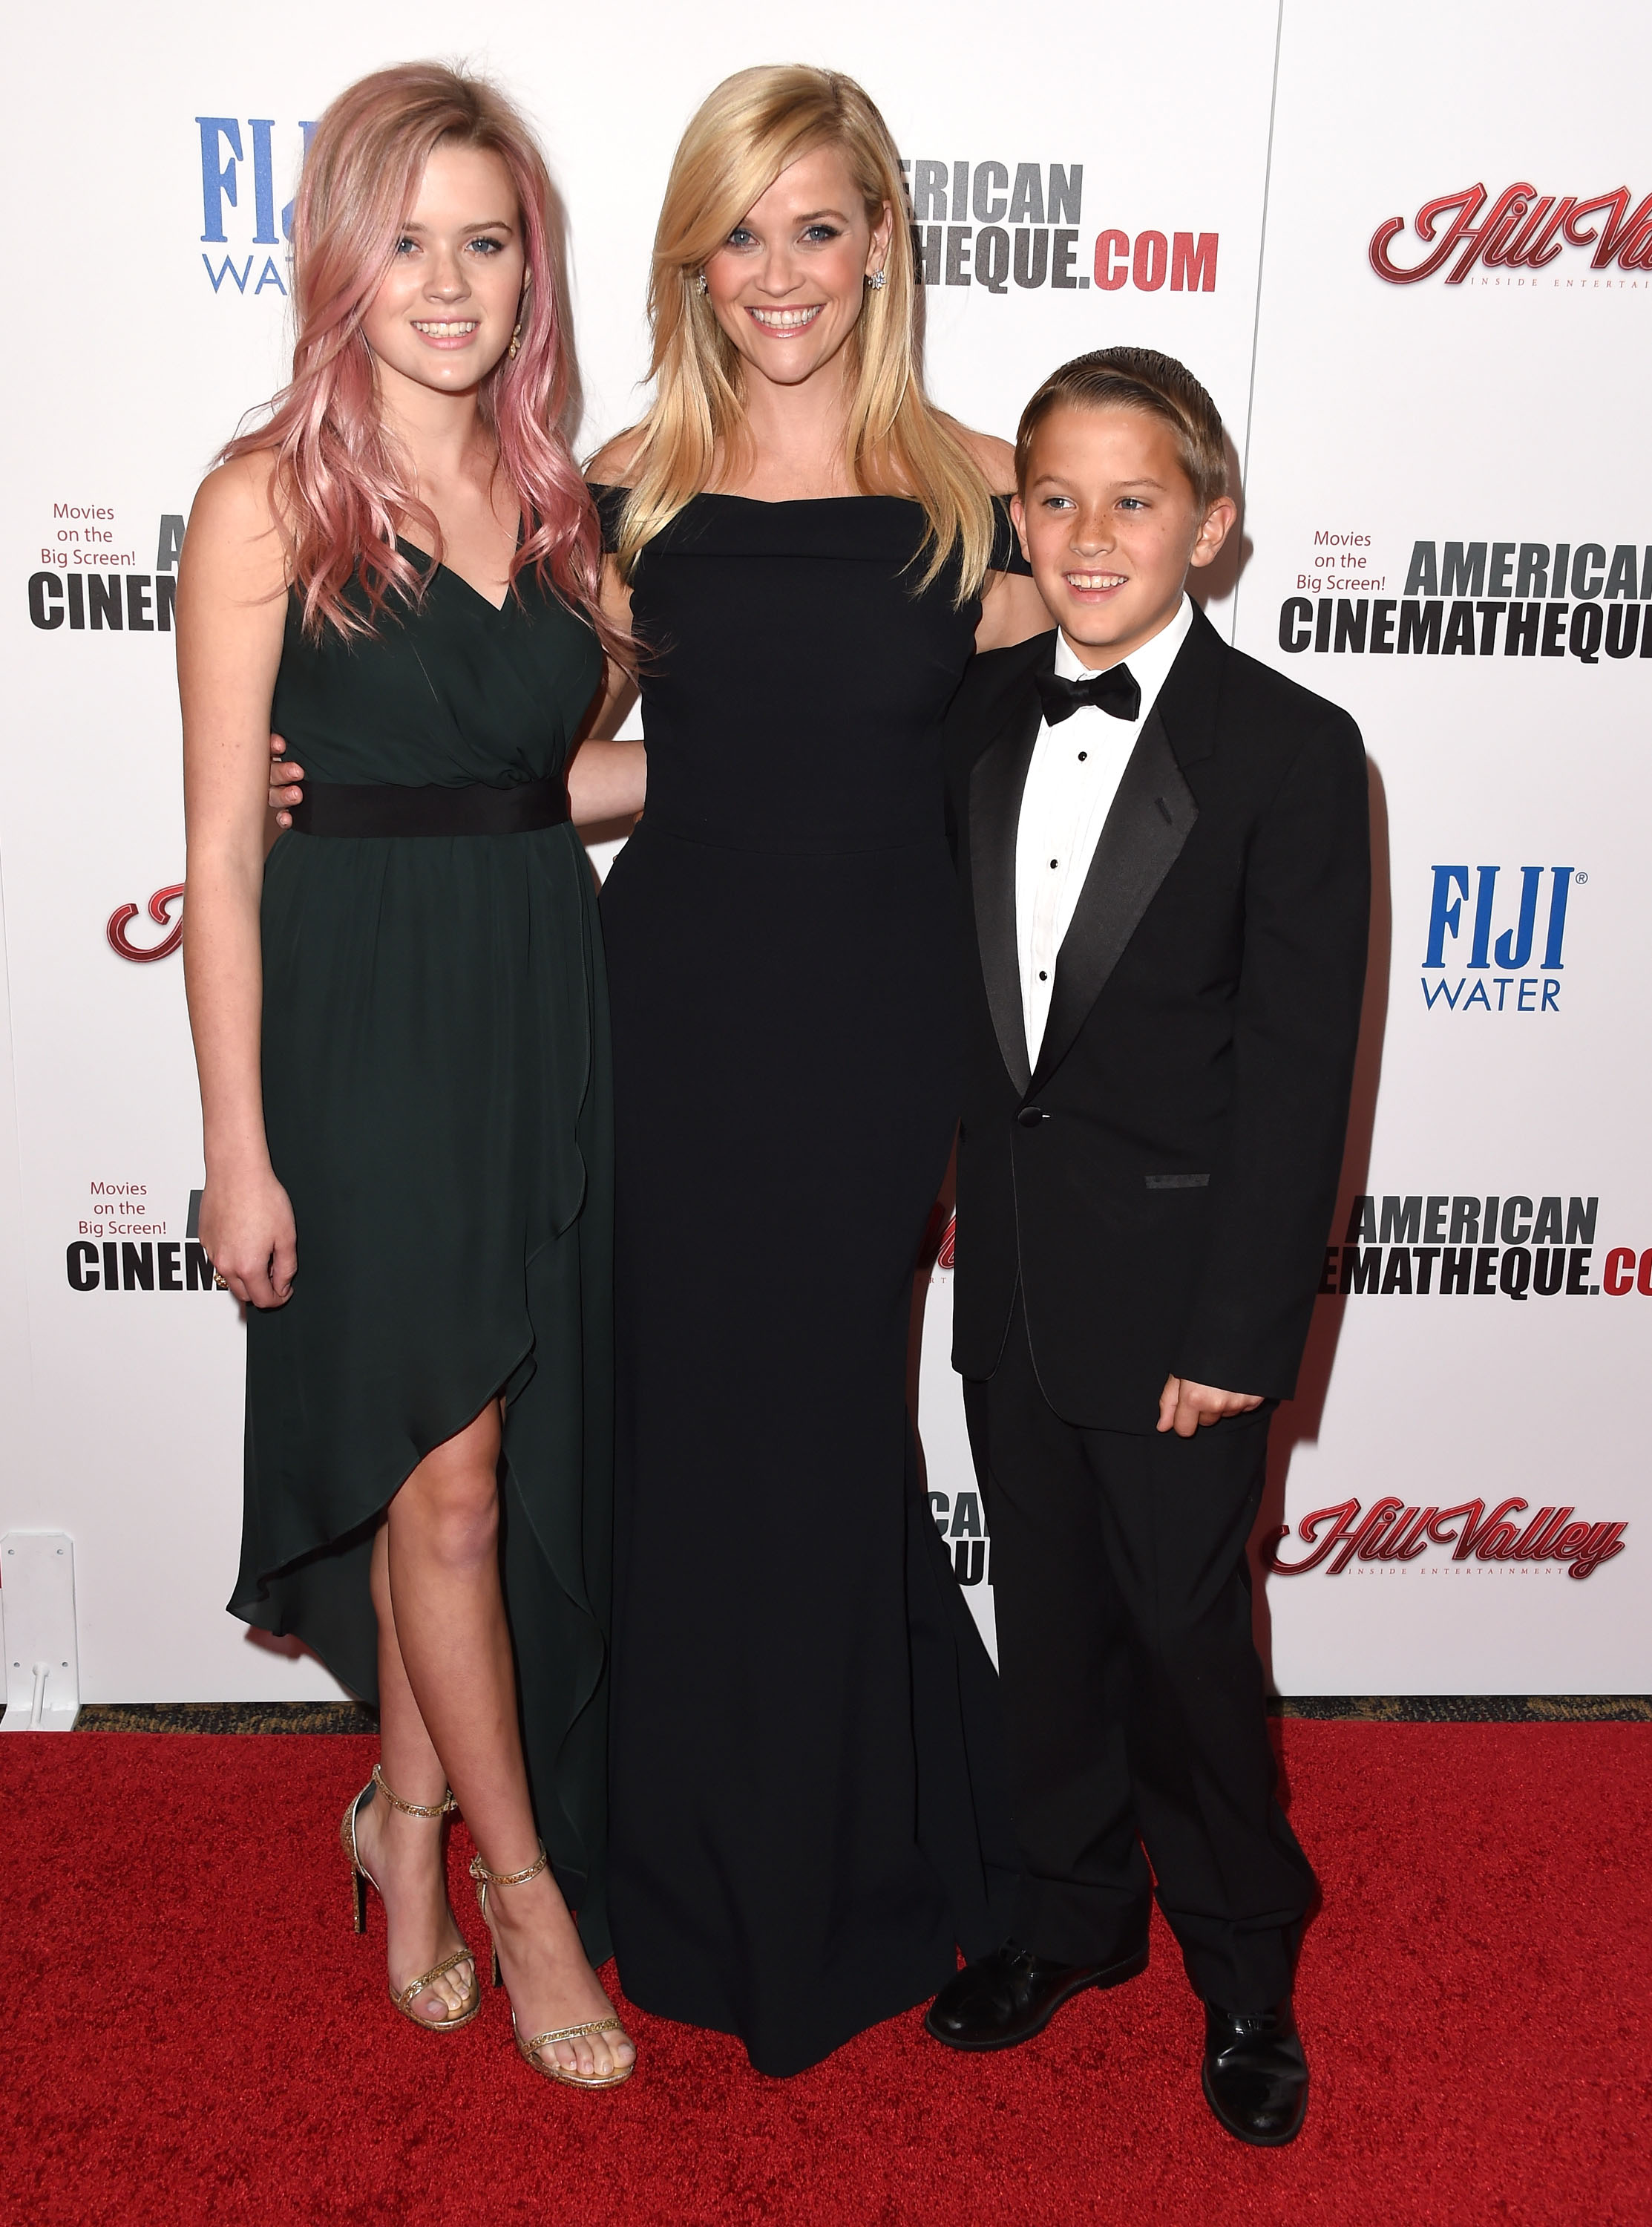 Ava Phillippe. Reese Witherspoon and Deacon Reese Phillippe at the 29th American Cinematheque Award Honoring Reese Witherspoon on October 30, 2015 in Los Angeles, California | Source: Getty Images